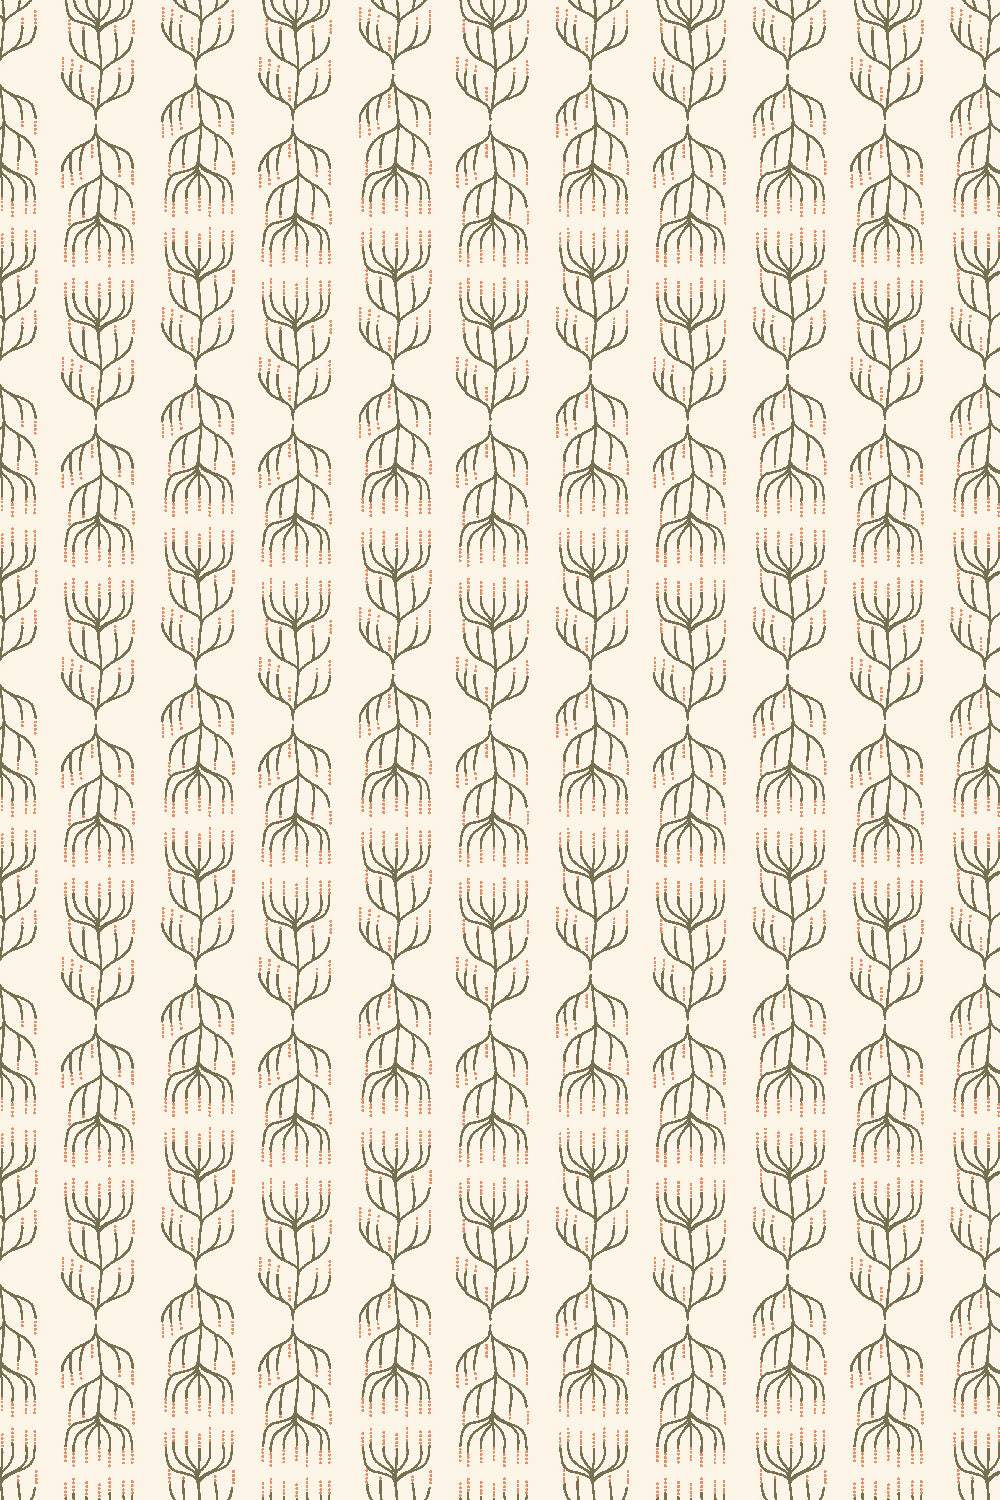 Twin Hills Queen Anne's Lace By Ash Cascade For Cotton + Steel Fabrics Olive